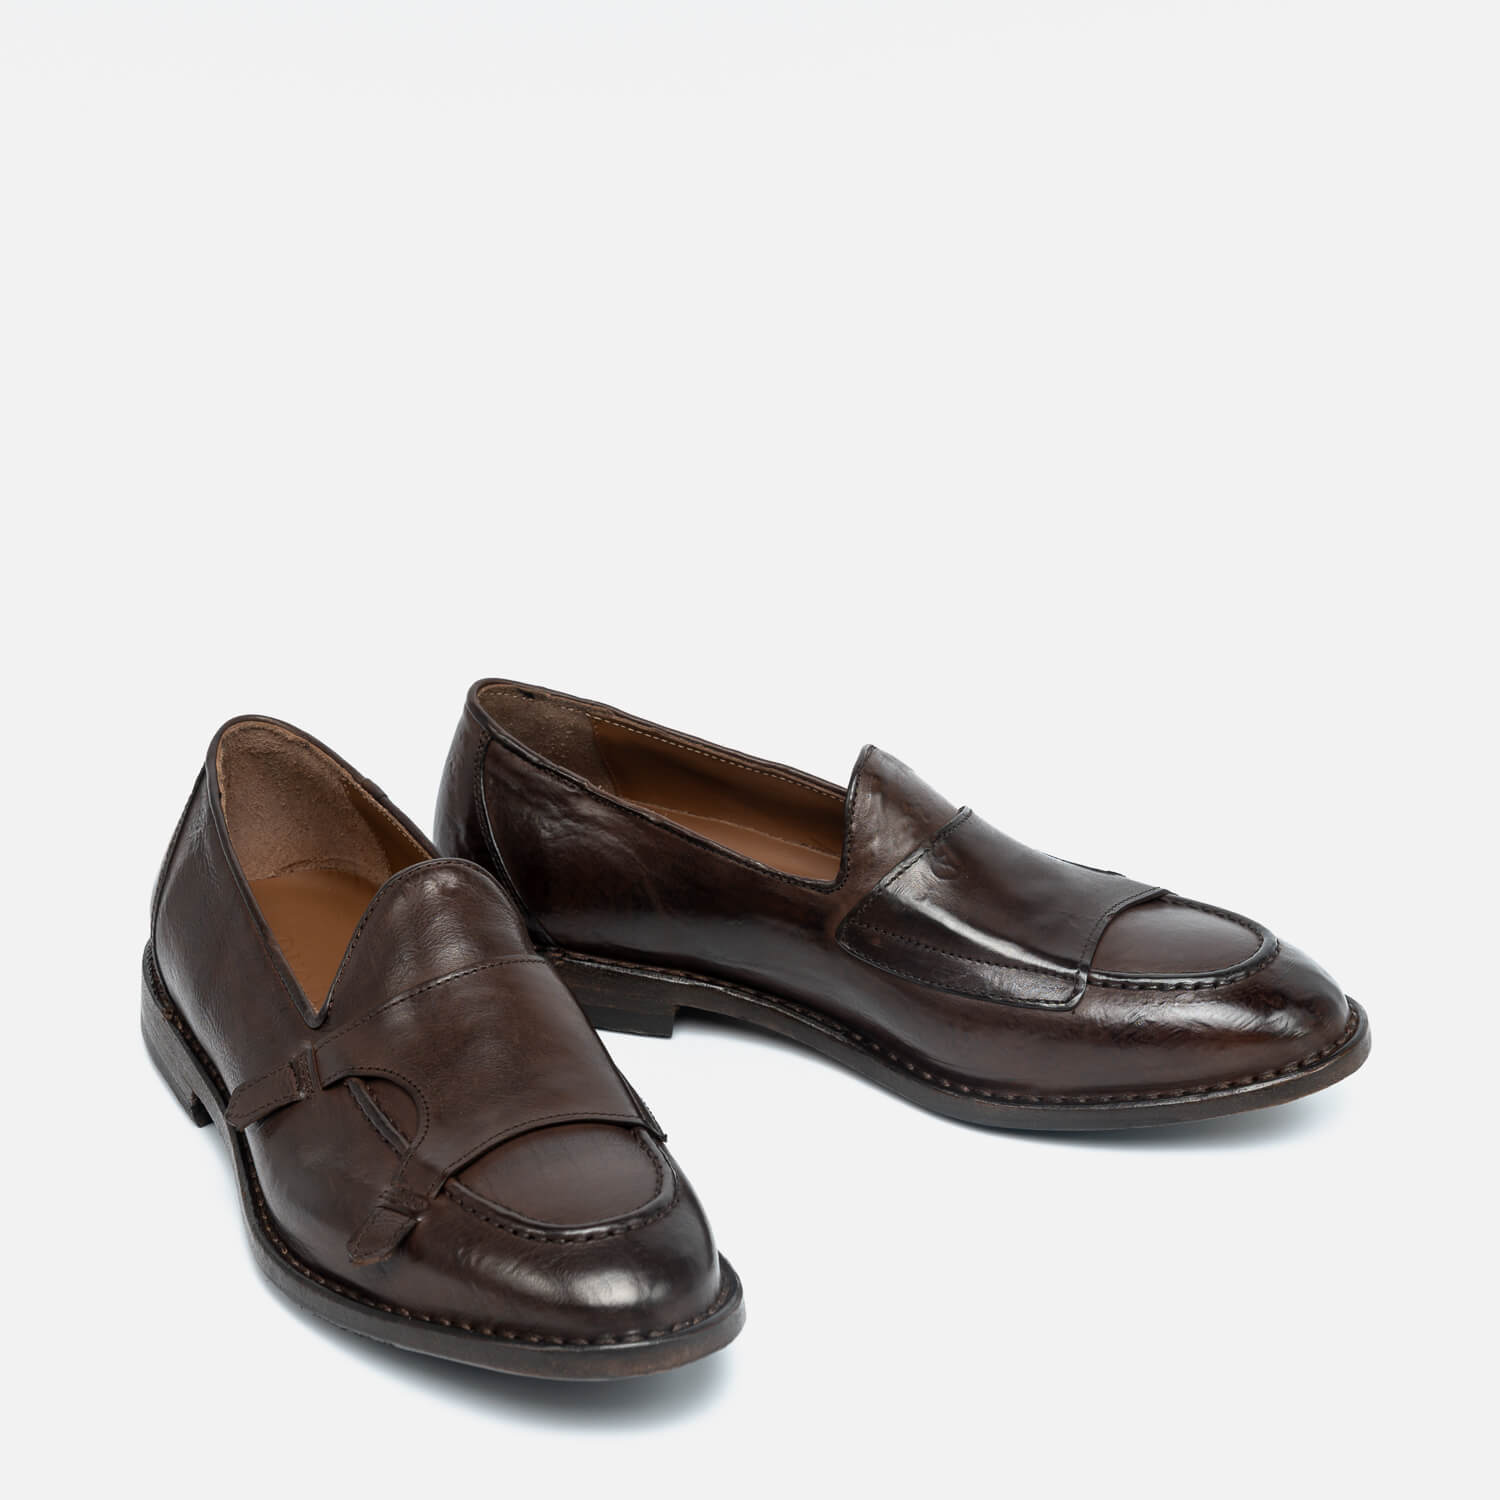 Cesare | Model 2726 loafers rich brown